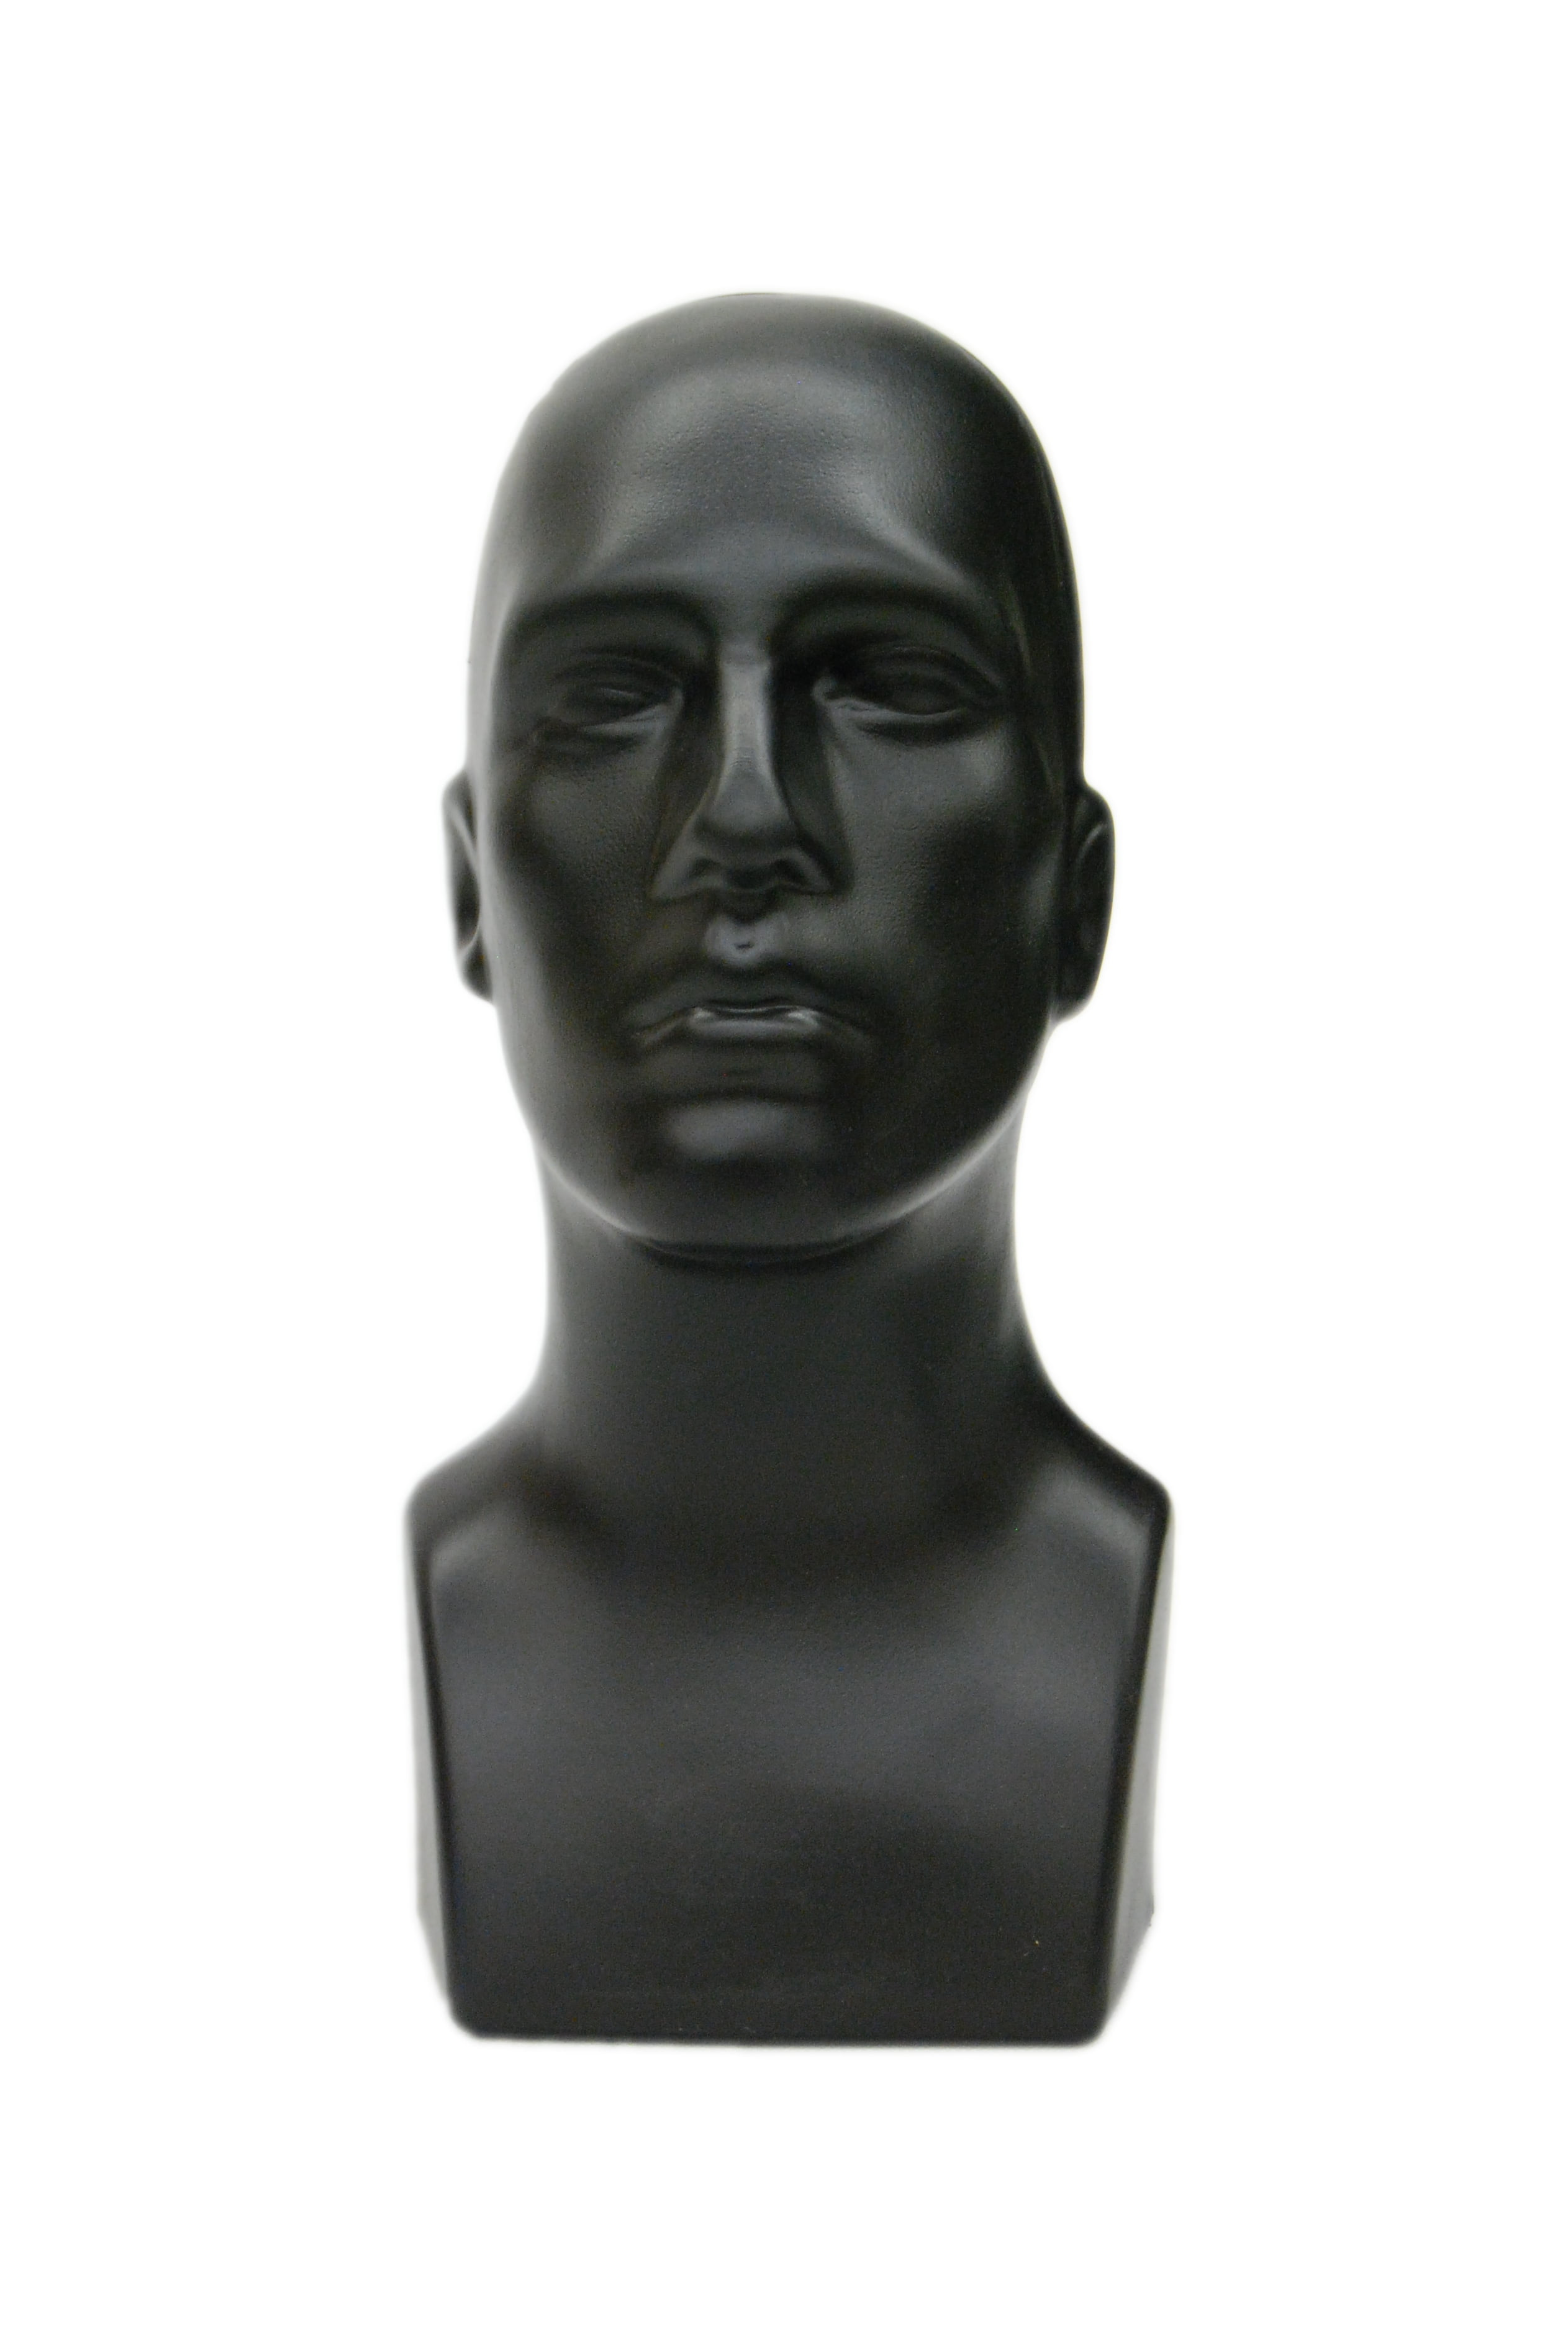 Light weight Male mannequin head abstract style #PS-M-BK 